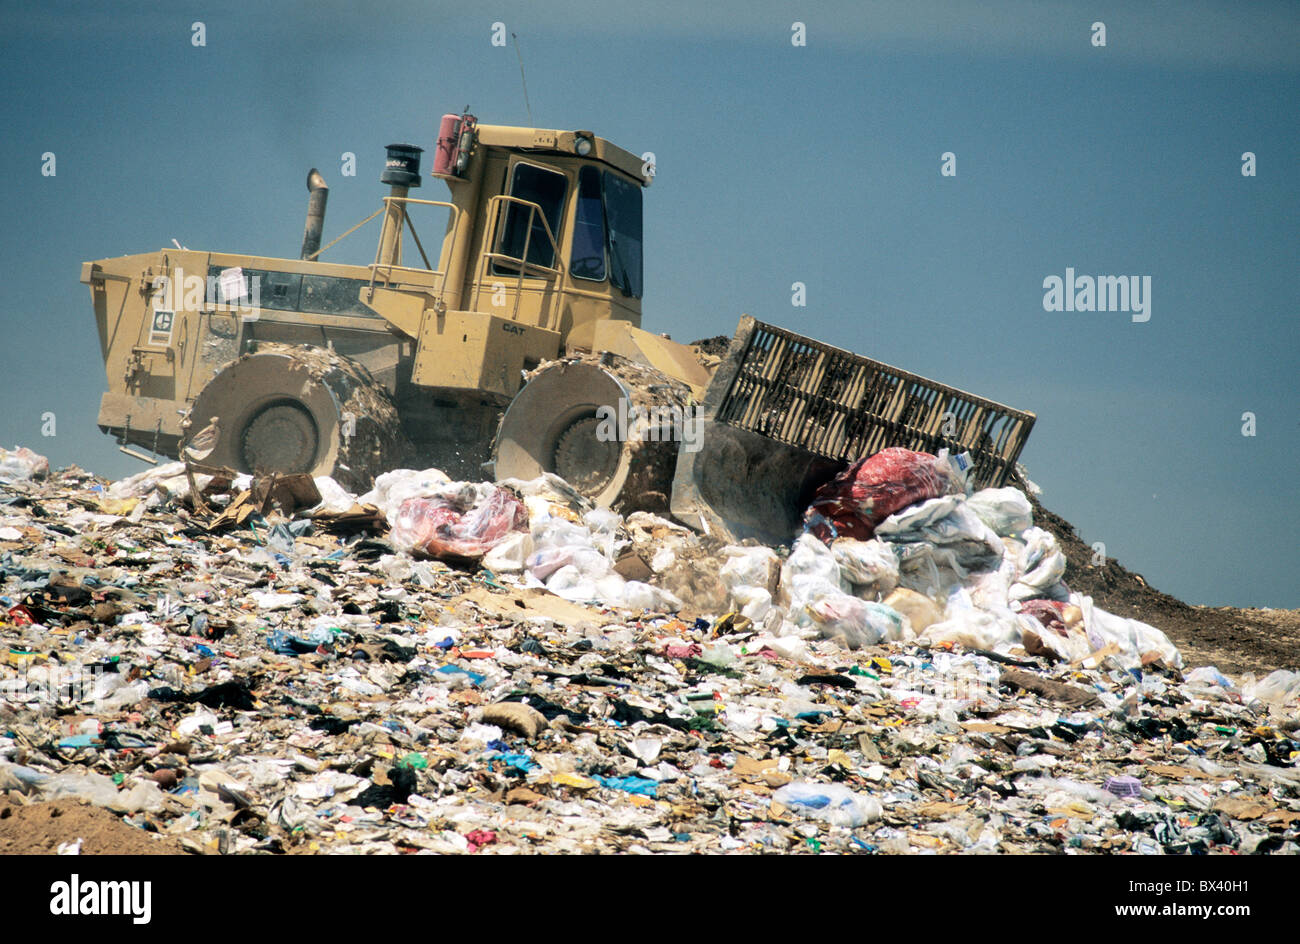 Tractor compactor/dozer '826C Cat.' self propelled with blade pushing trash. Stock Photo